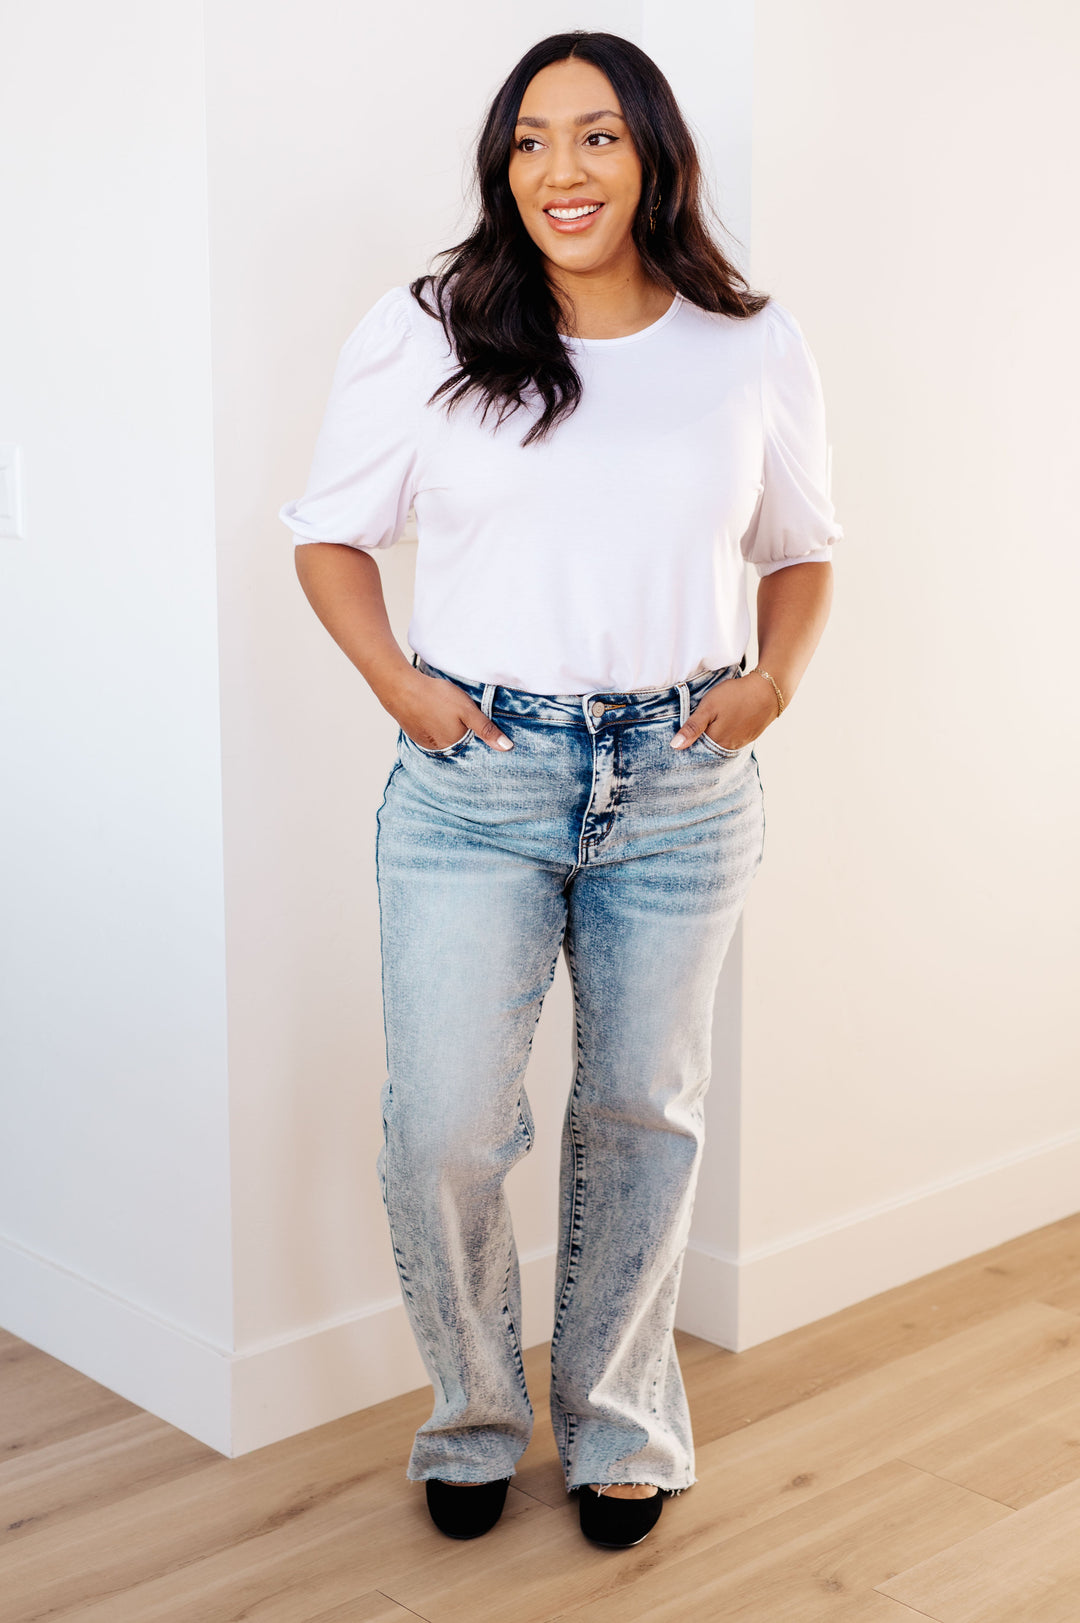 Dory High Waist Mineral Wash Raw Hem Wide Leg Jeans-Denim-Inspired by Justeen-Women's Clothing Boutique